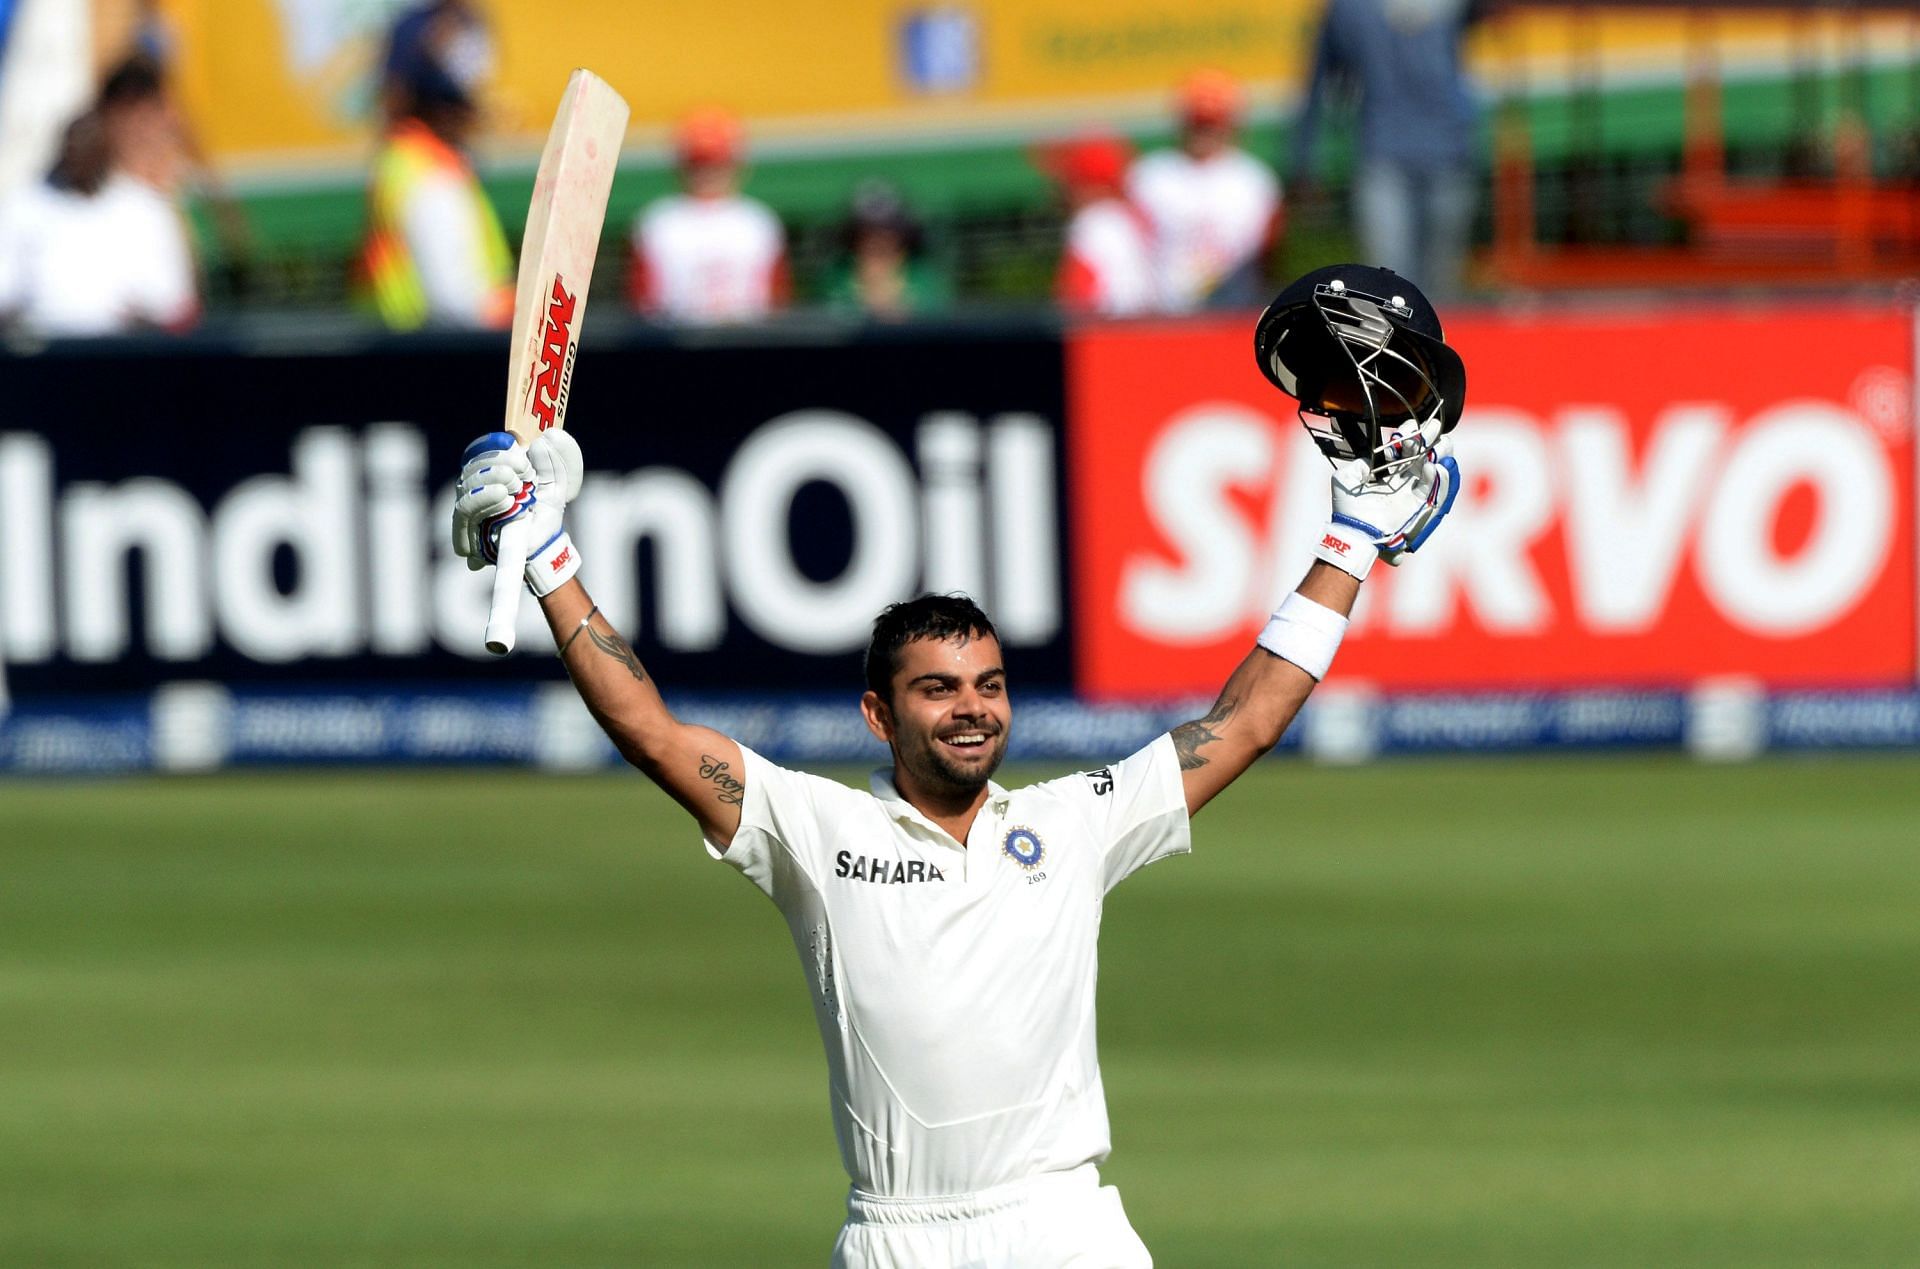 Virat Kohli was a real star in the making back in 2013